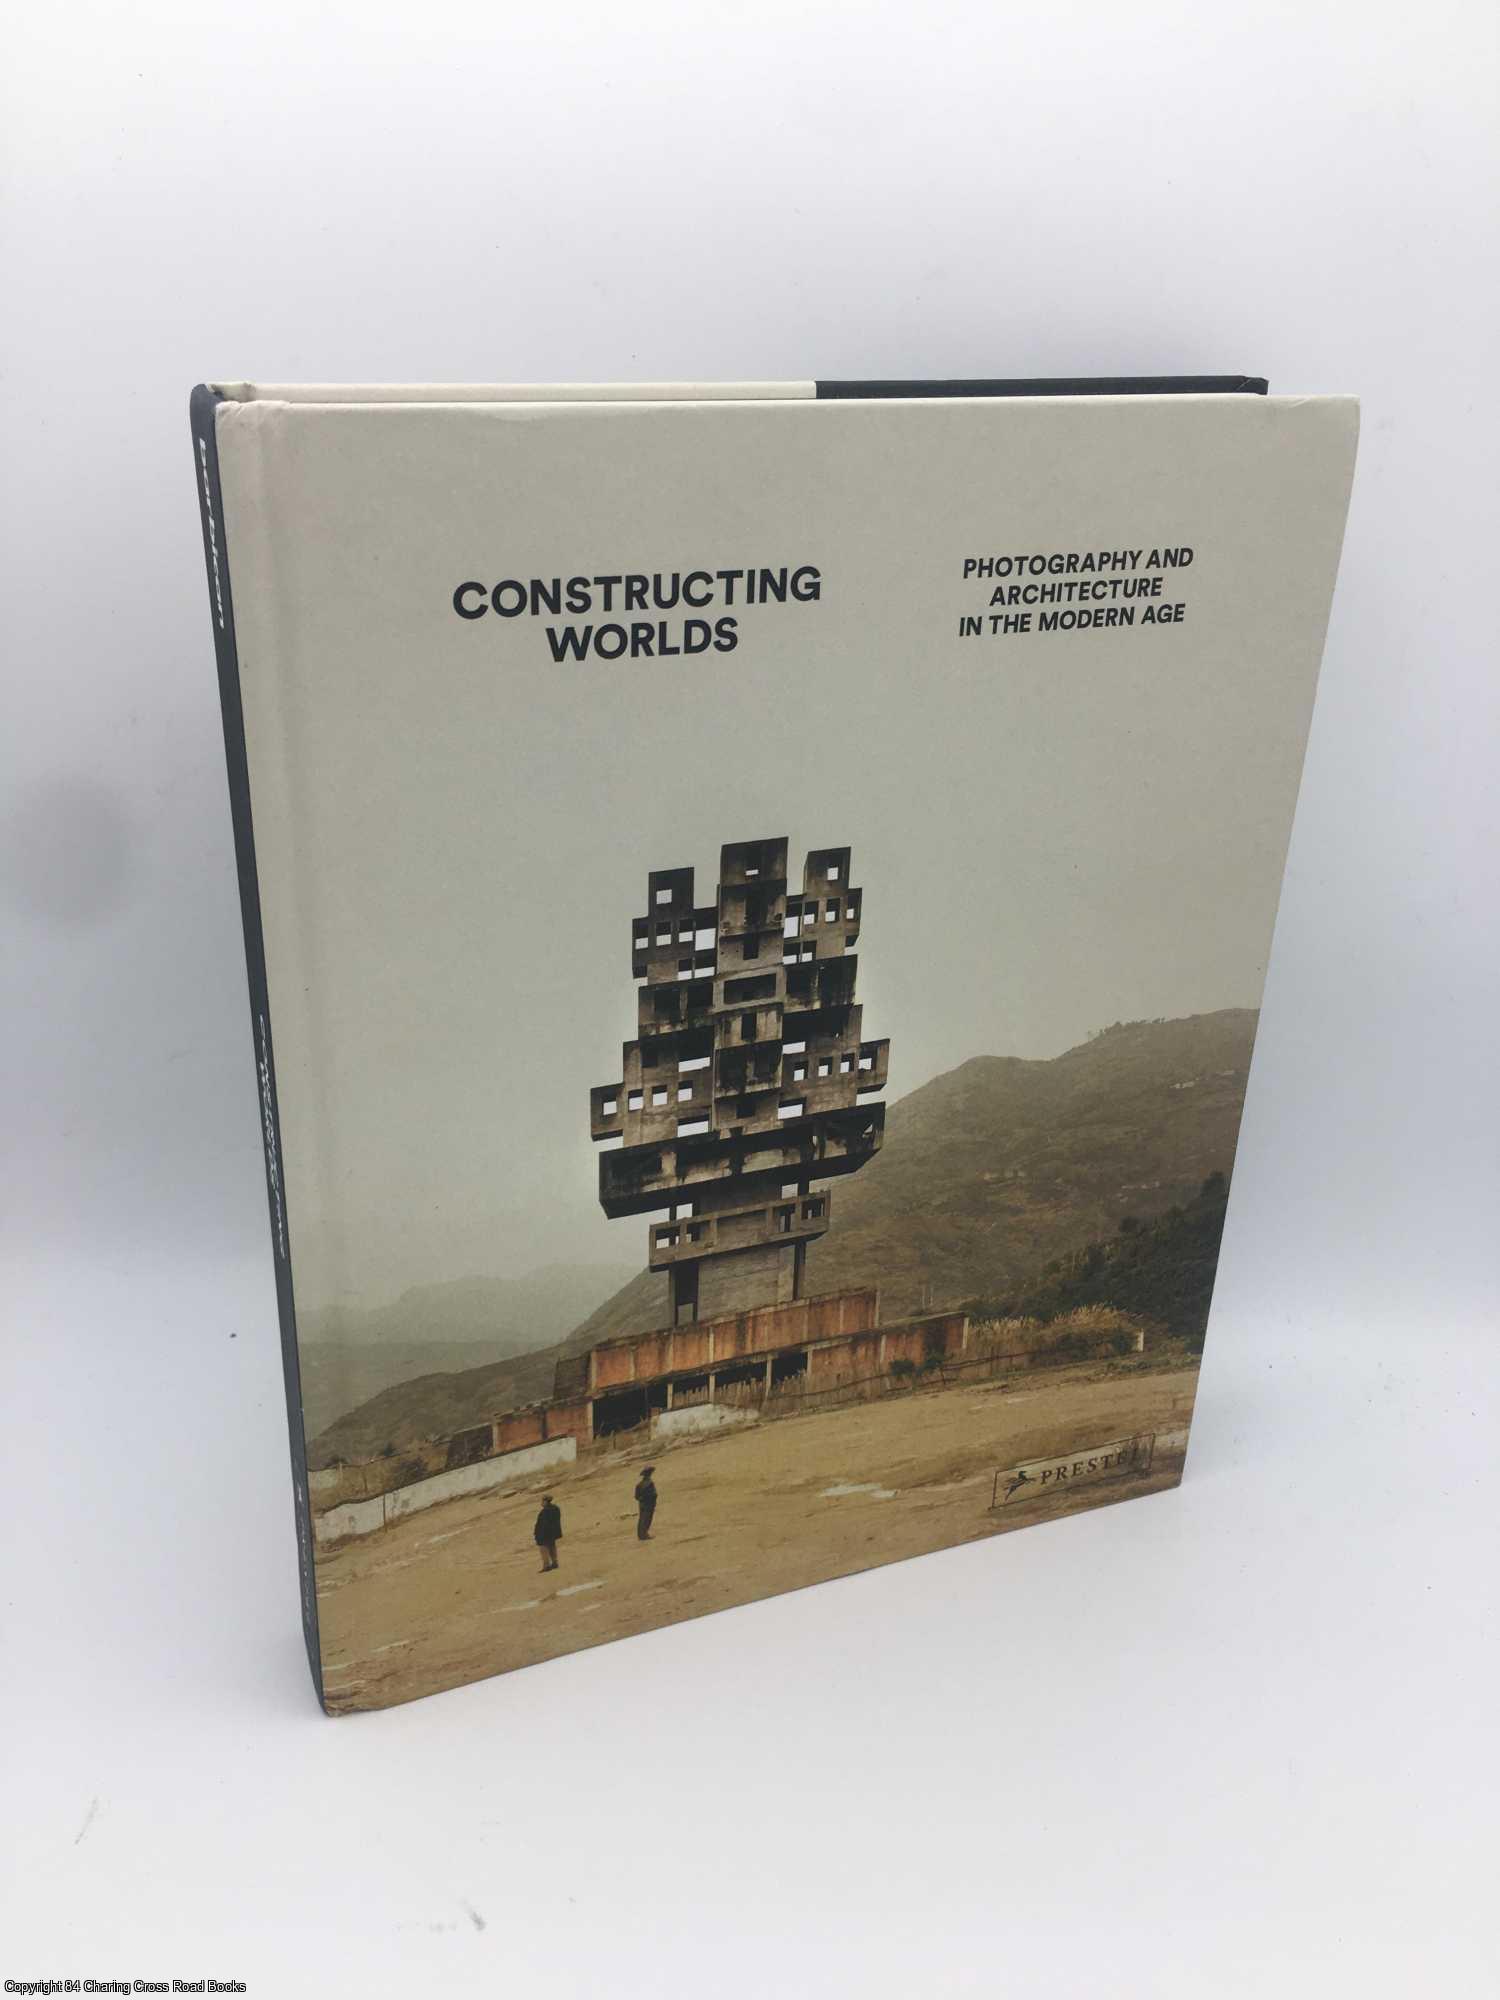 Pardo, Alona - Constructing Worlds: Photography and Architecture in the Modern Age